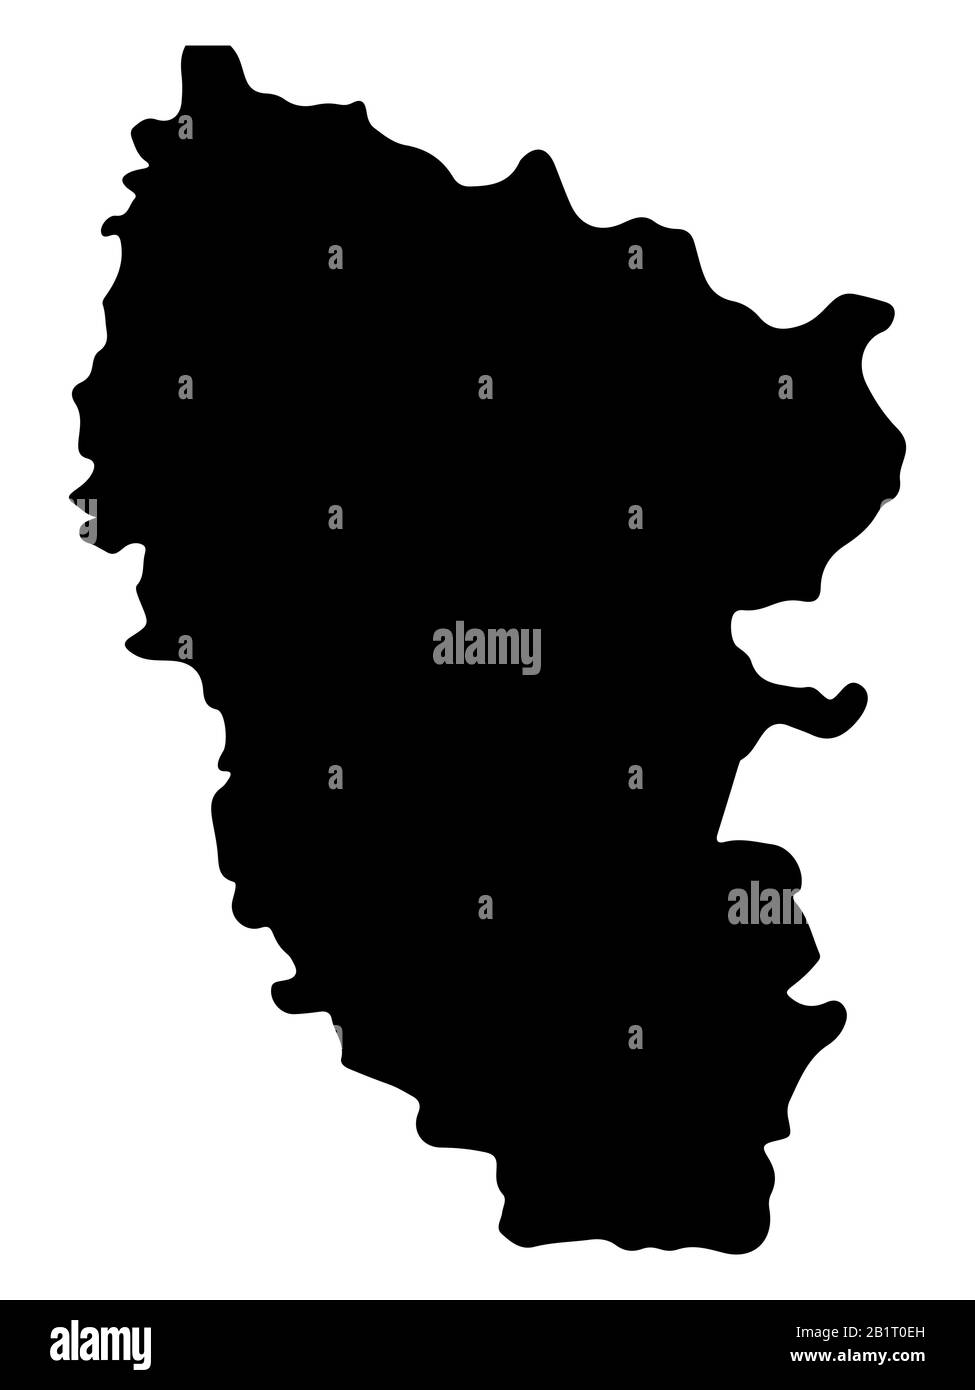 Luhansk Peoples Republic Map Silhouette Vector Stock Vector